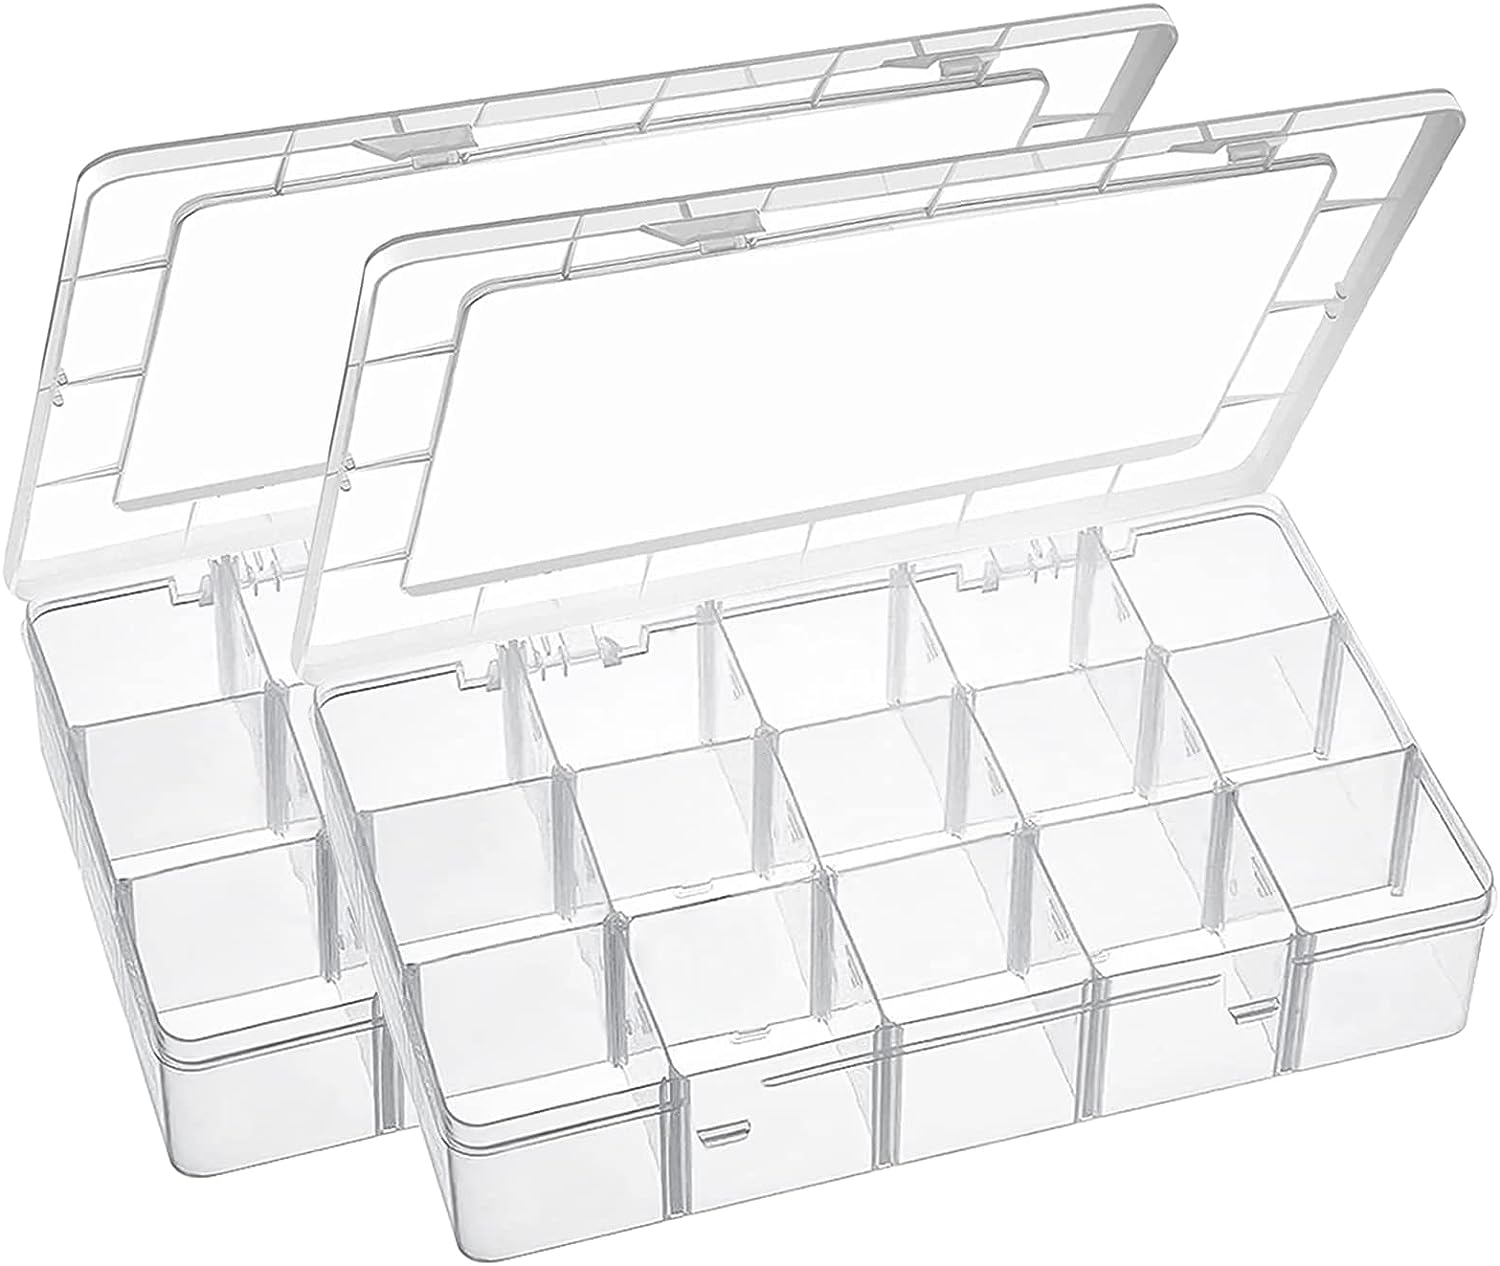 Clear Plastic Compartment Boxes WholeSale - Price List, Bulk Buy at